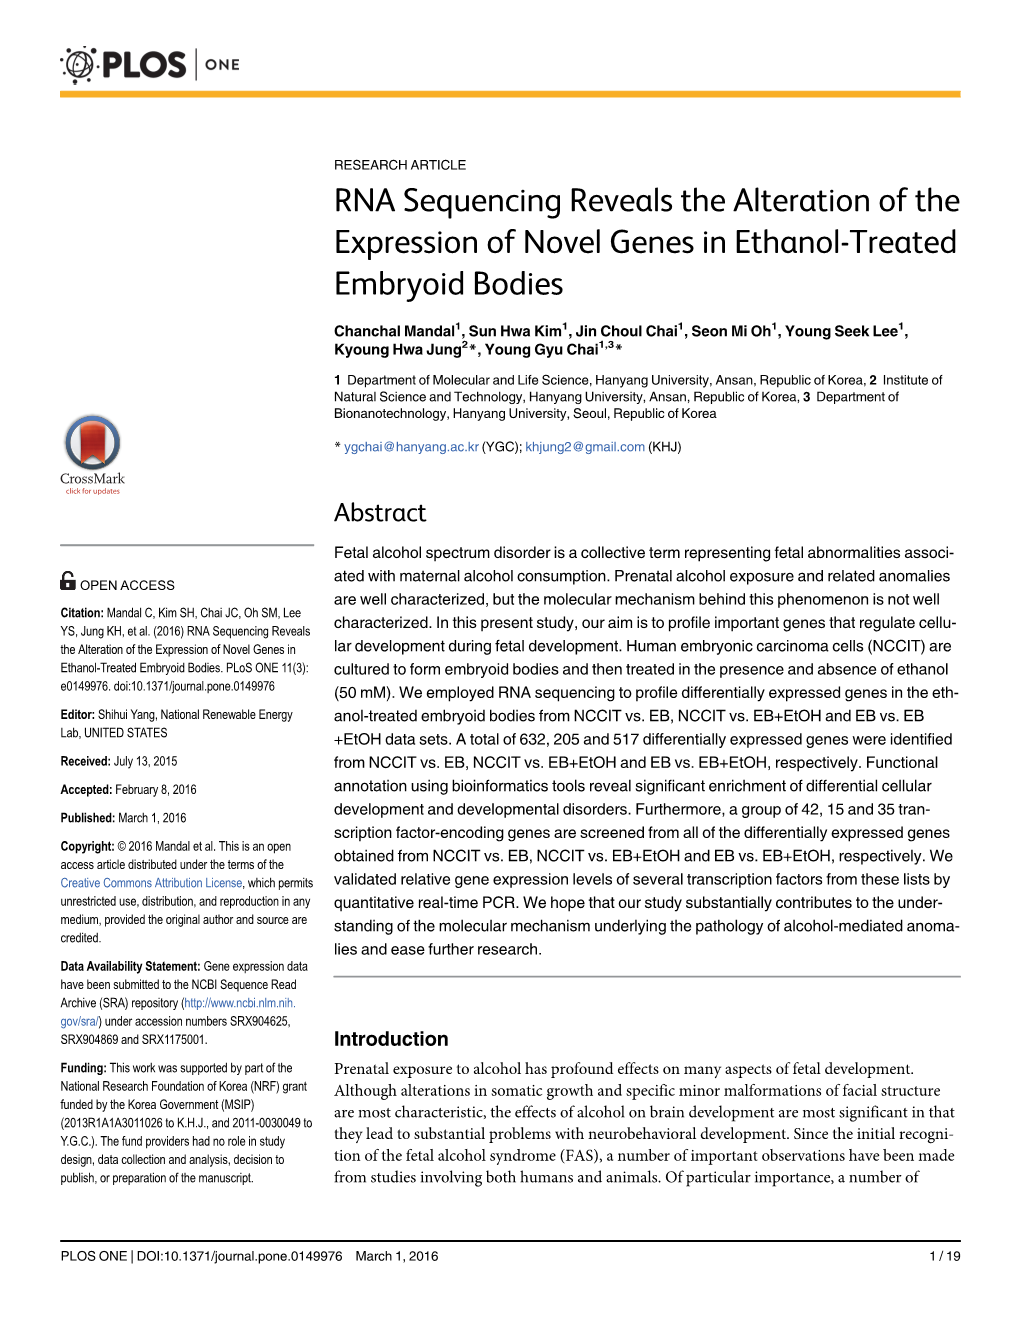 RNA Sequencing Reveals the Alteration of the Expression of Novel Genes in Ethanol-Treated Embryoid Bodies